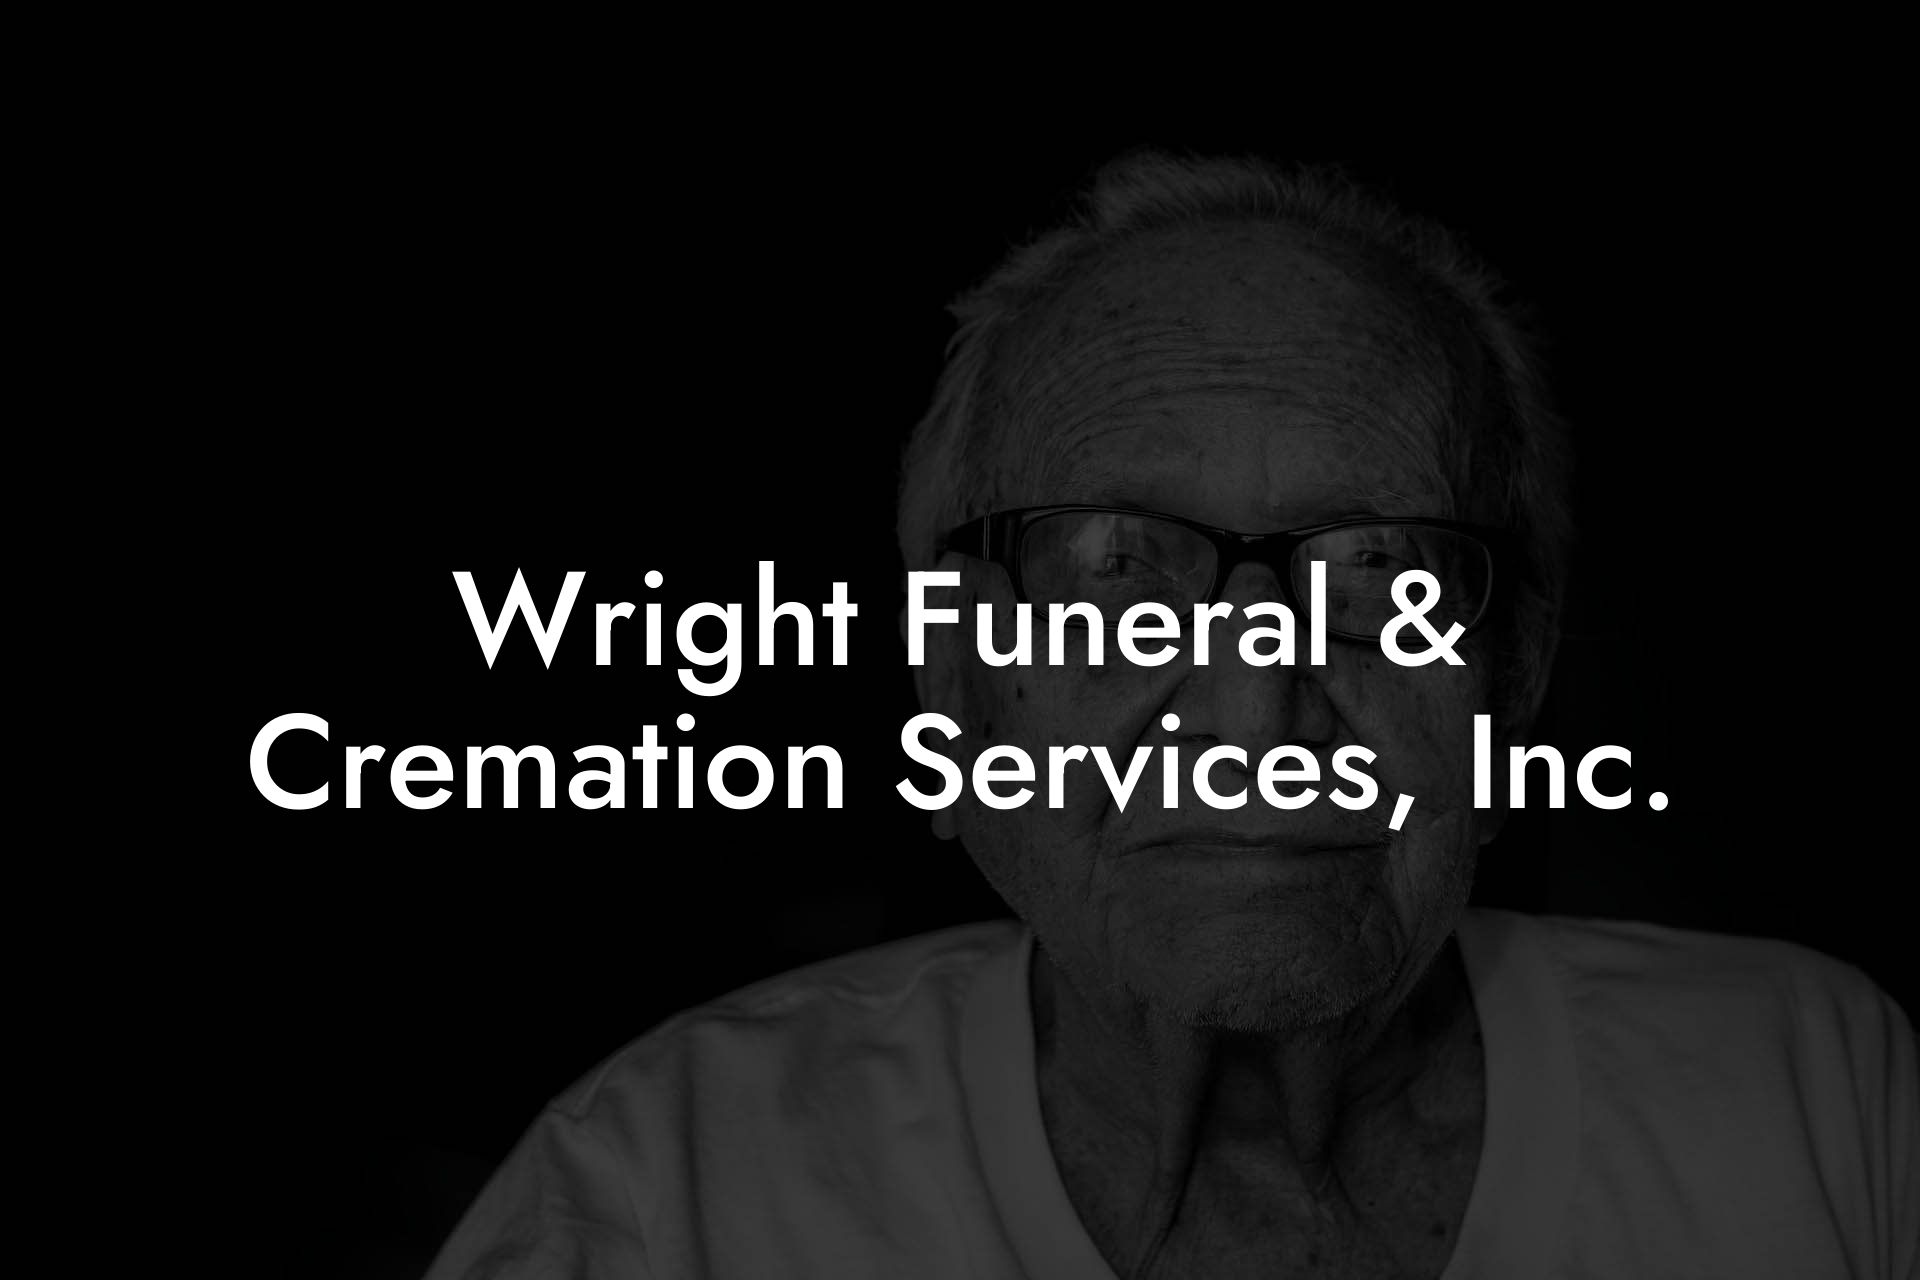 Wright Funeral & Cremation Services Inc